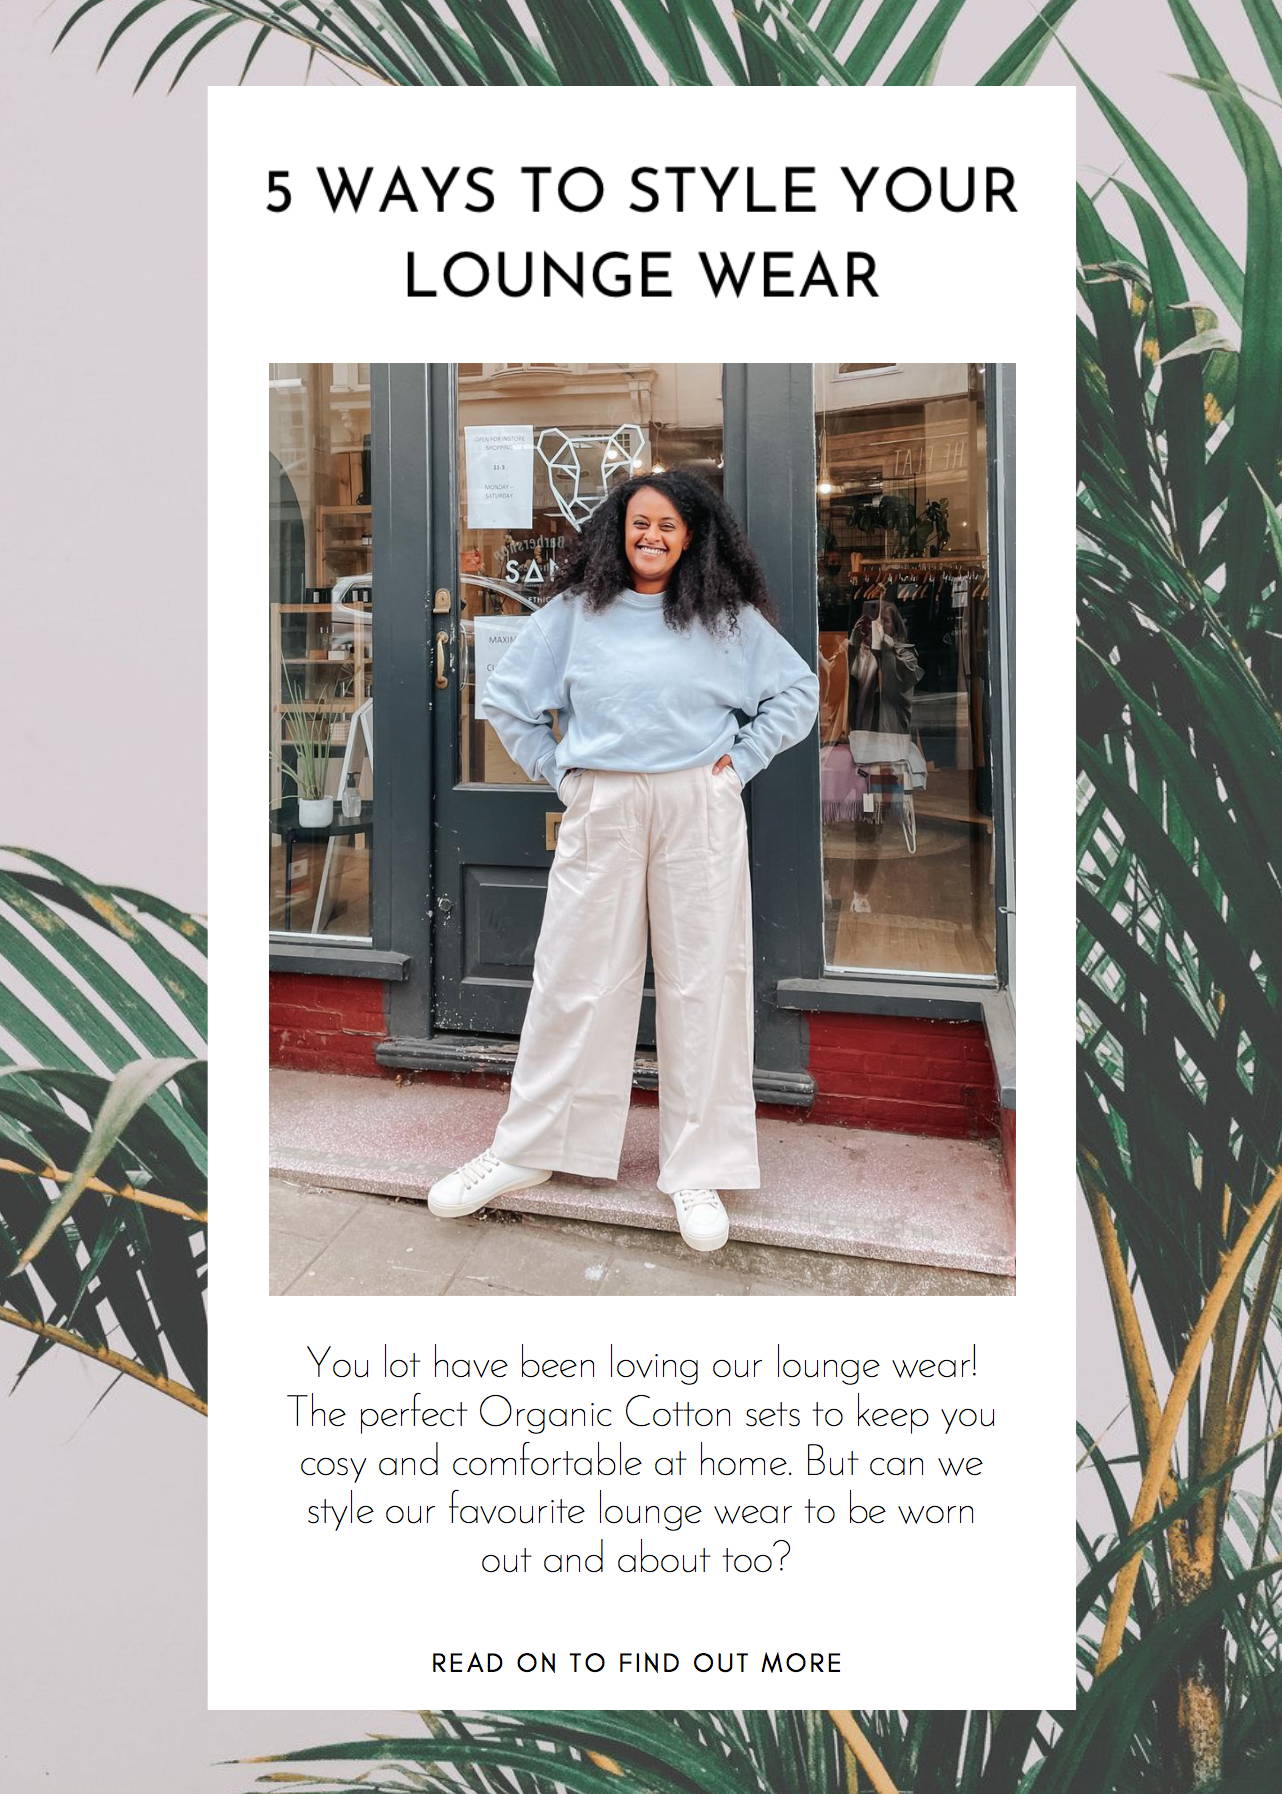 5 Ways to Style your Lounge Wear